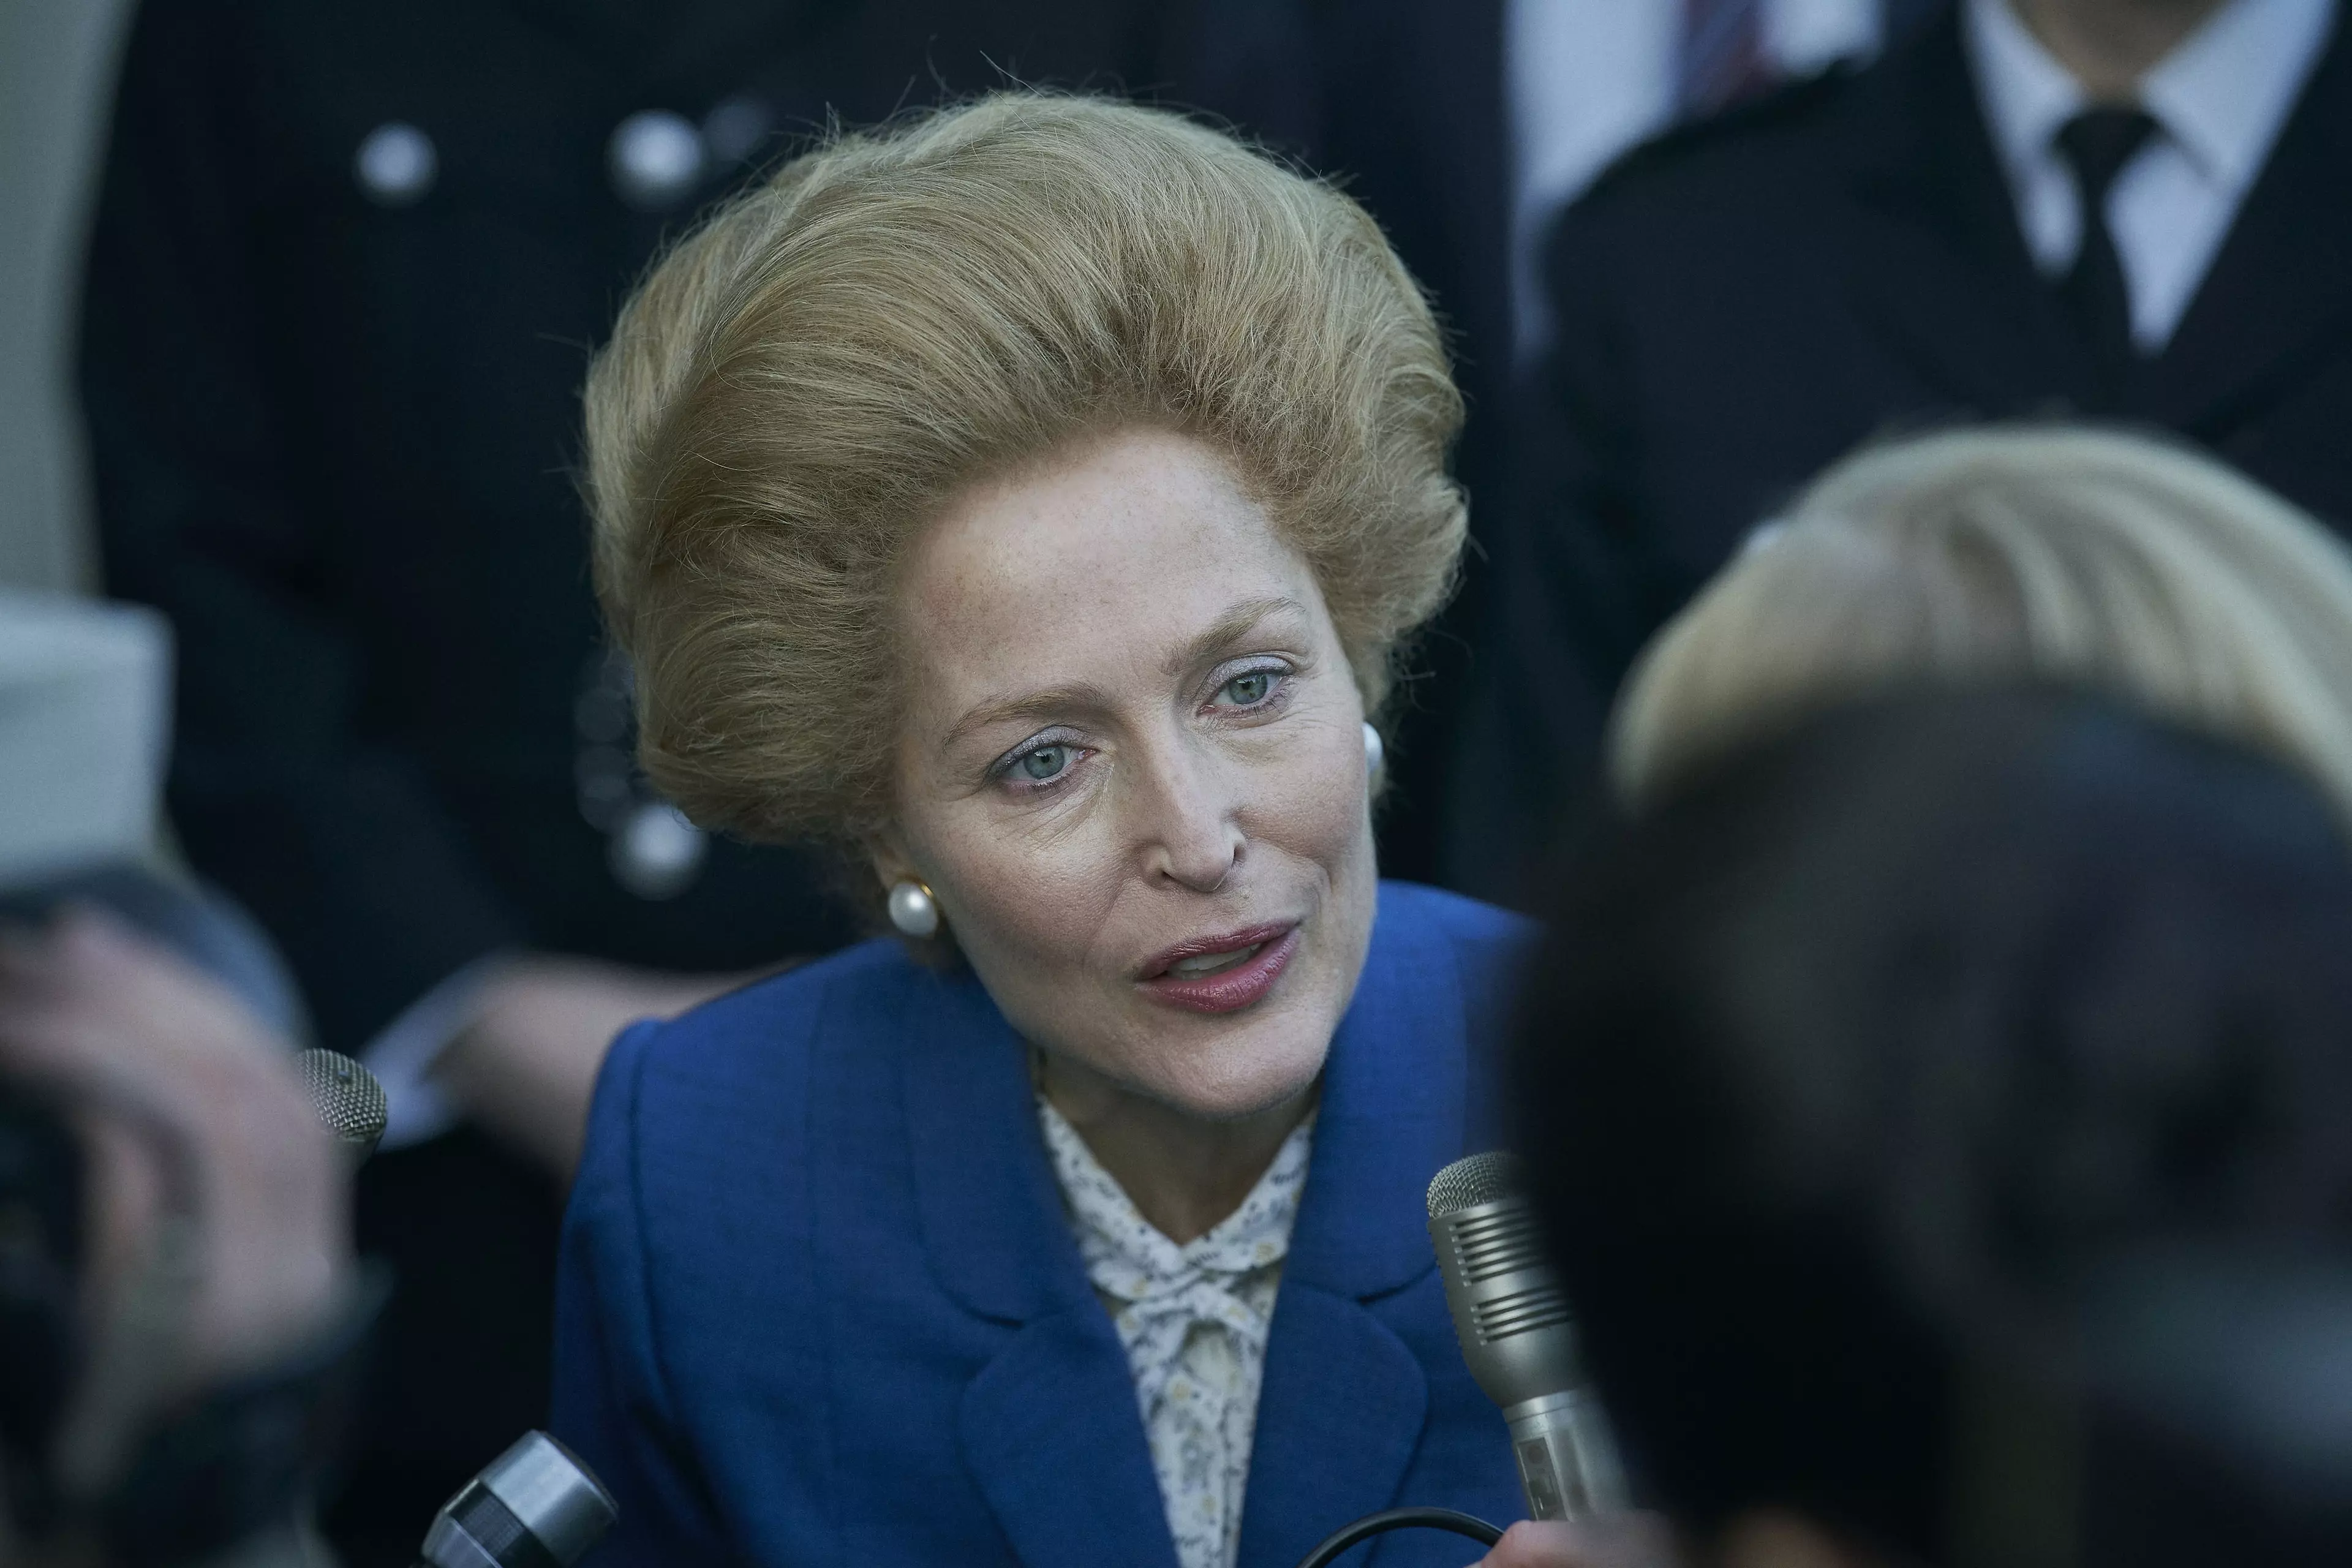 The fourth season also introduces fans to Gillian Anderson's portrayal of Margaret Thatcher (